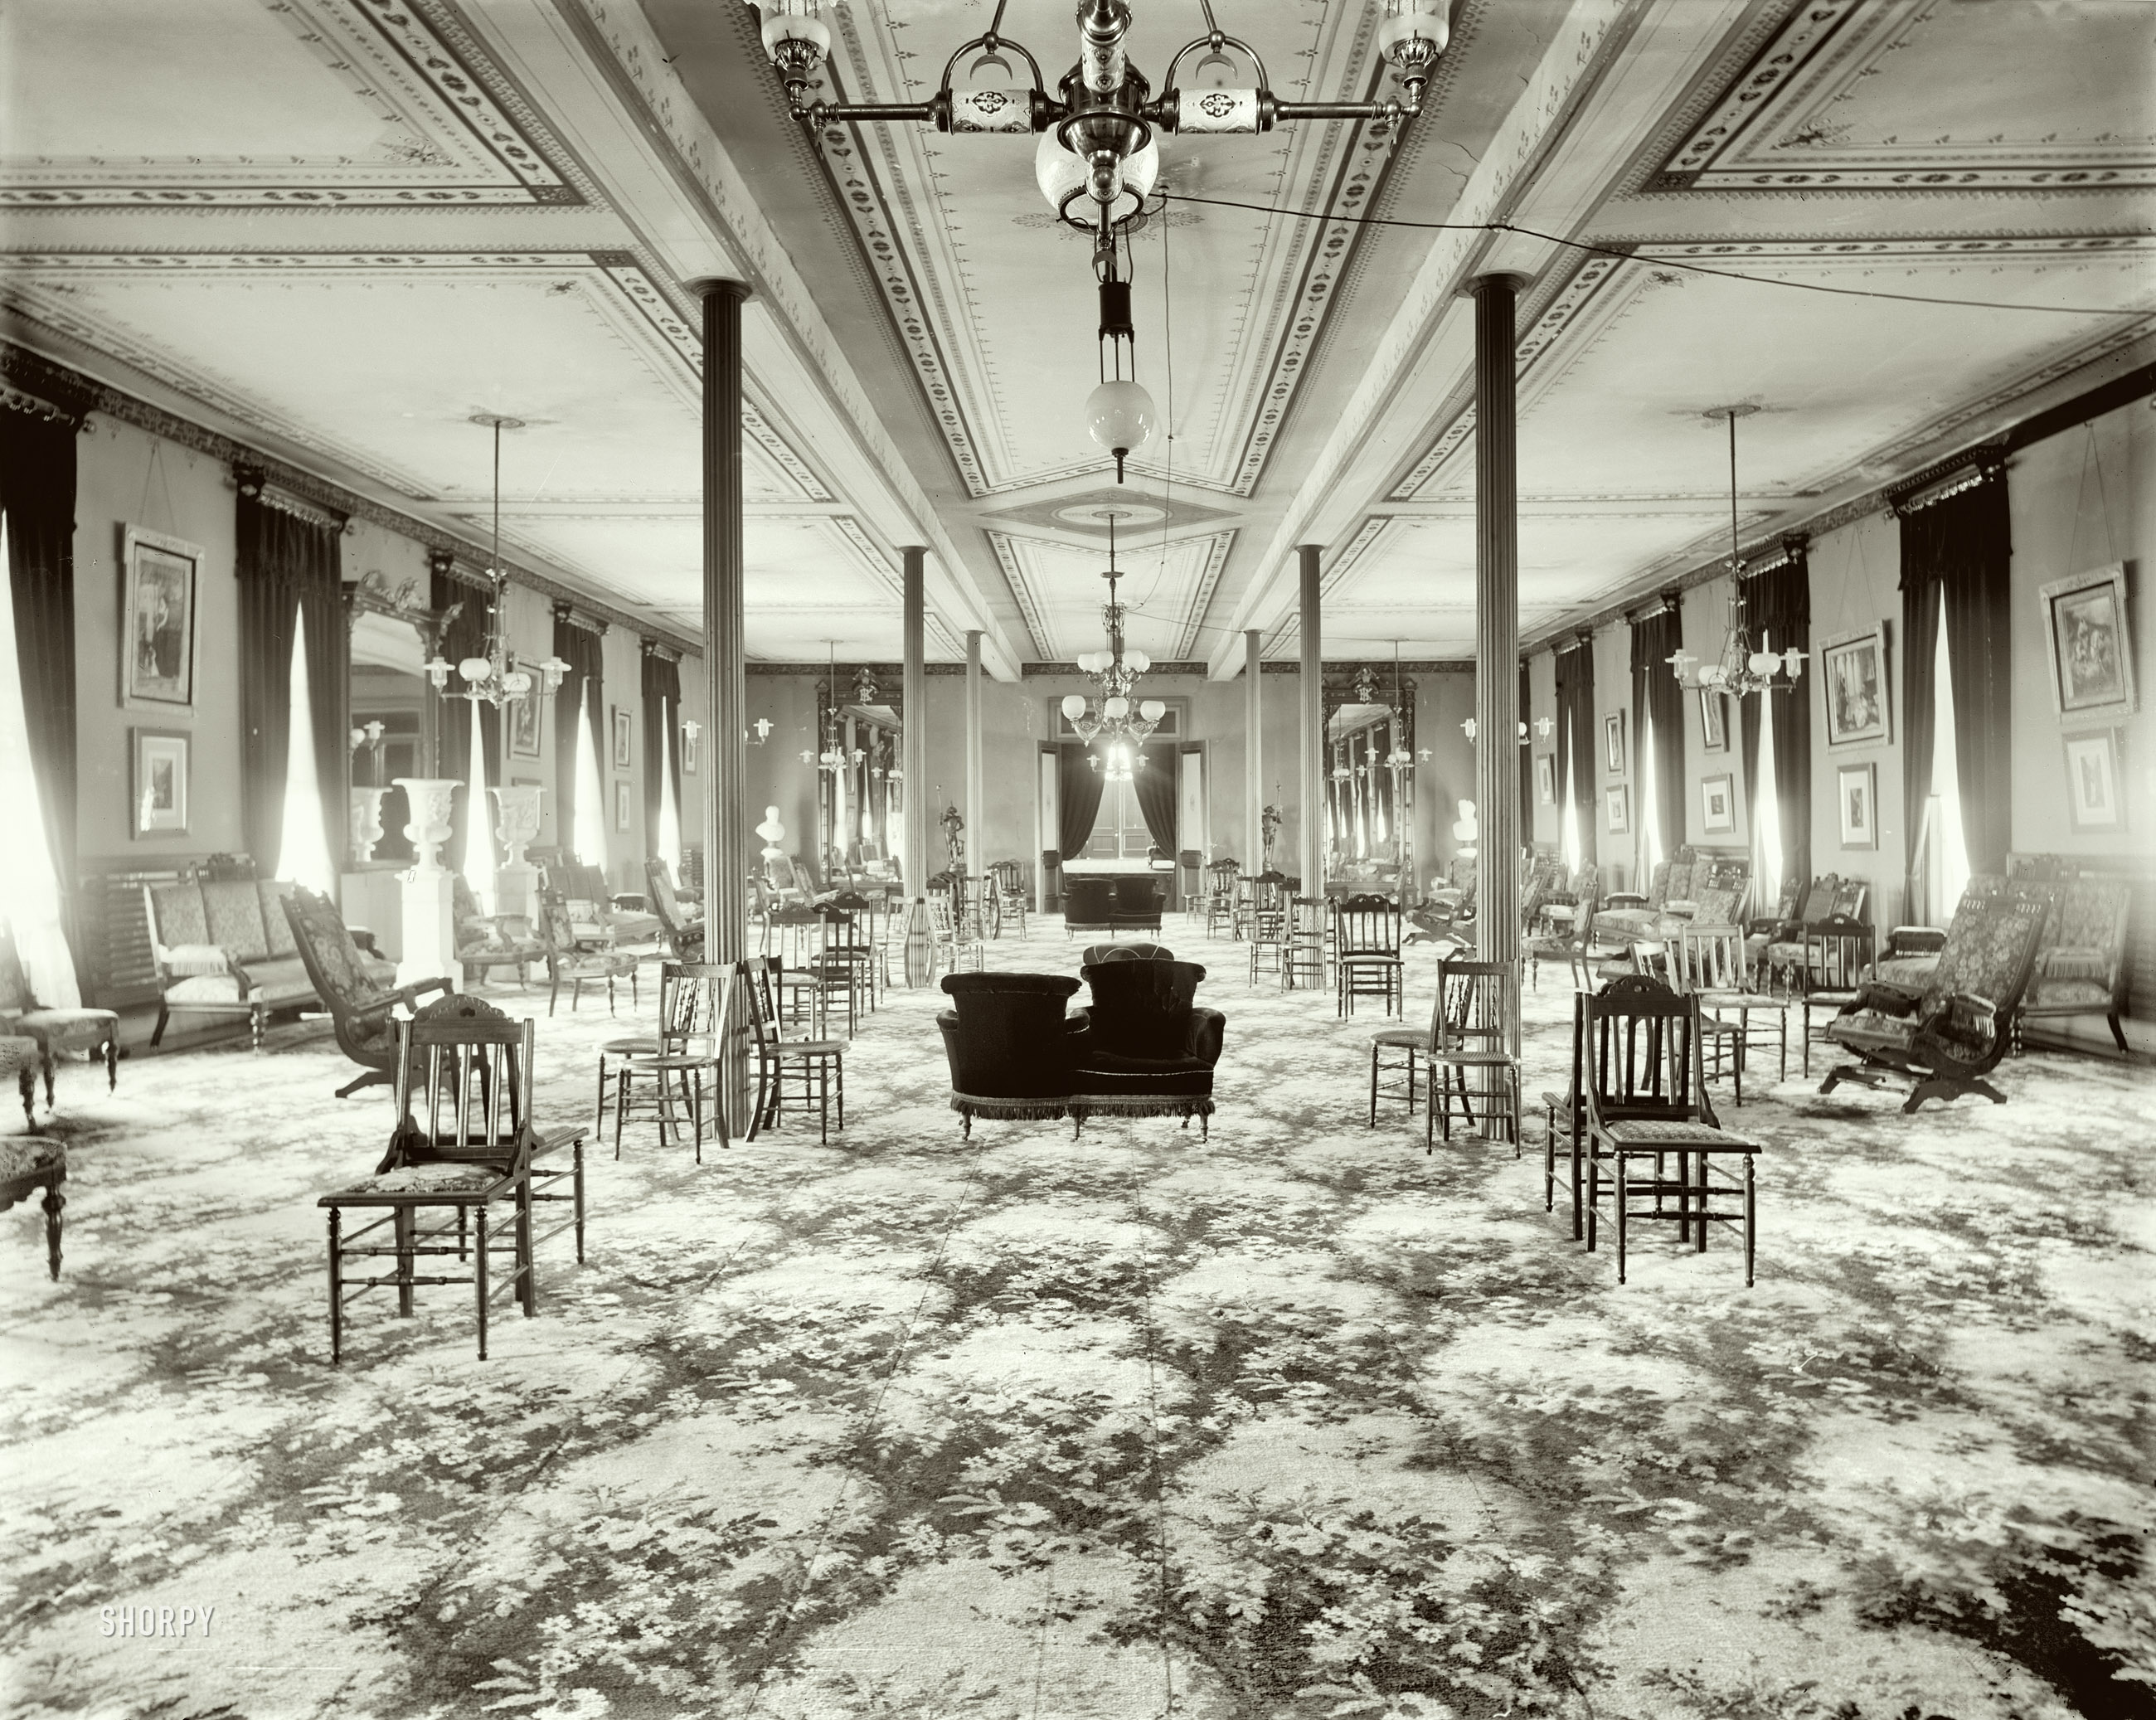 Circa 1905. "Parlor, Kaaterskill Hotel, Catskill Mountains, New York." 8x10 inch dry plate glass negative, Detroit Publishing Company. View full size.